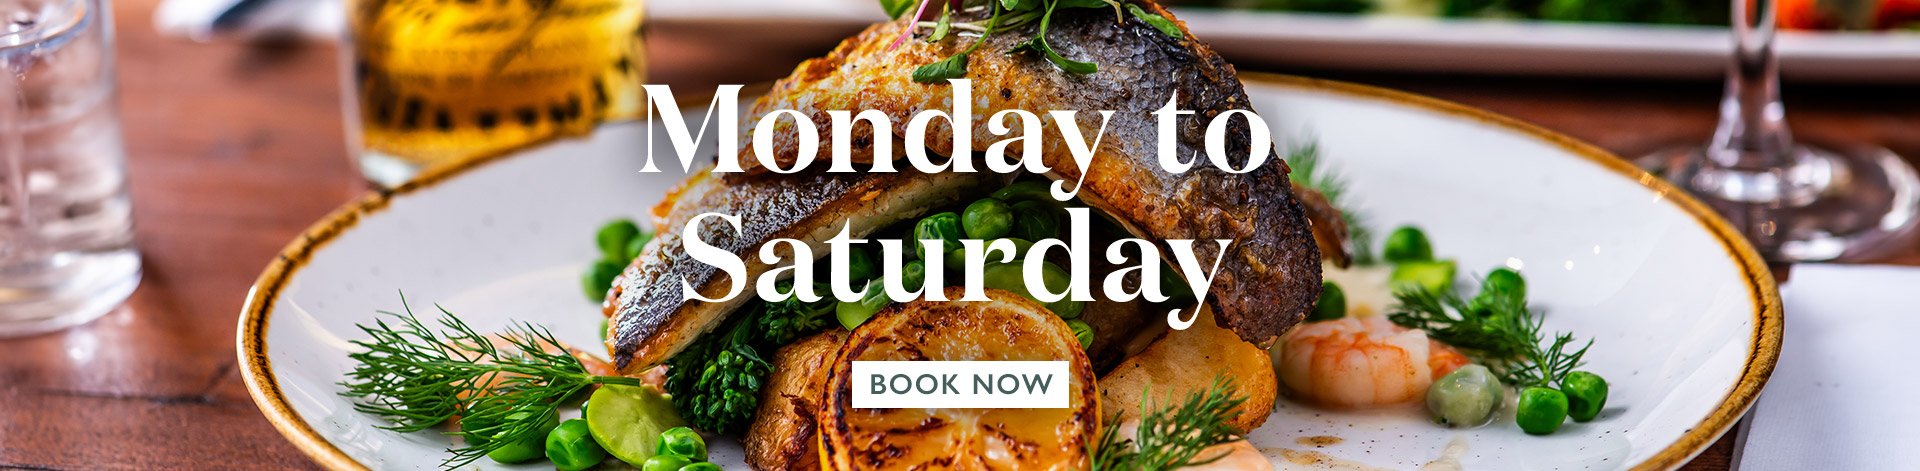 Book now at The Snow Goose